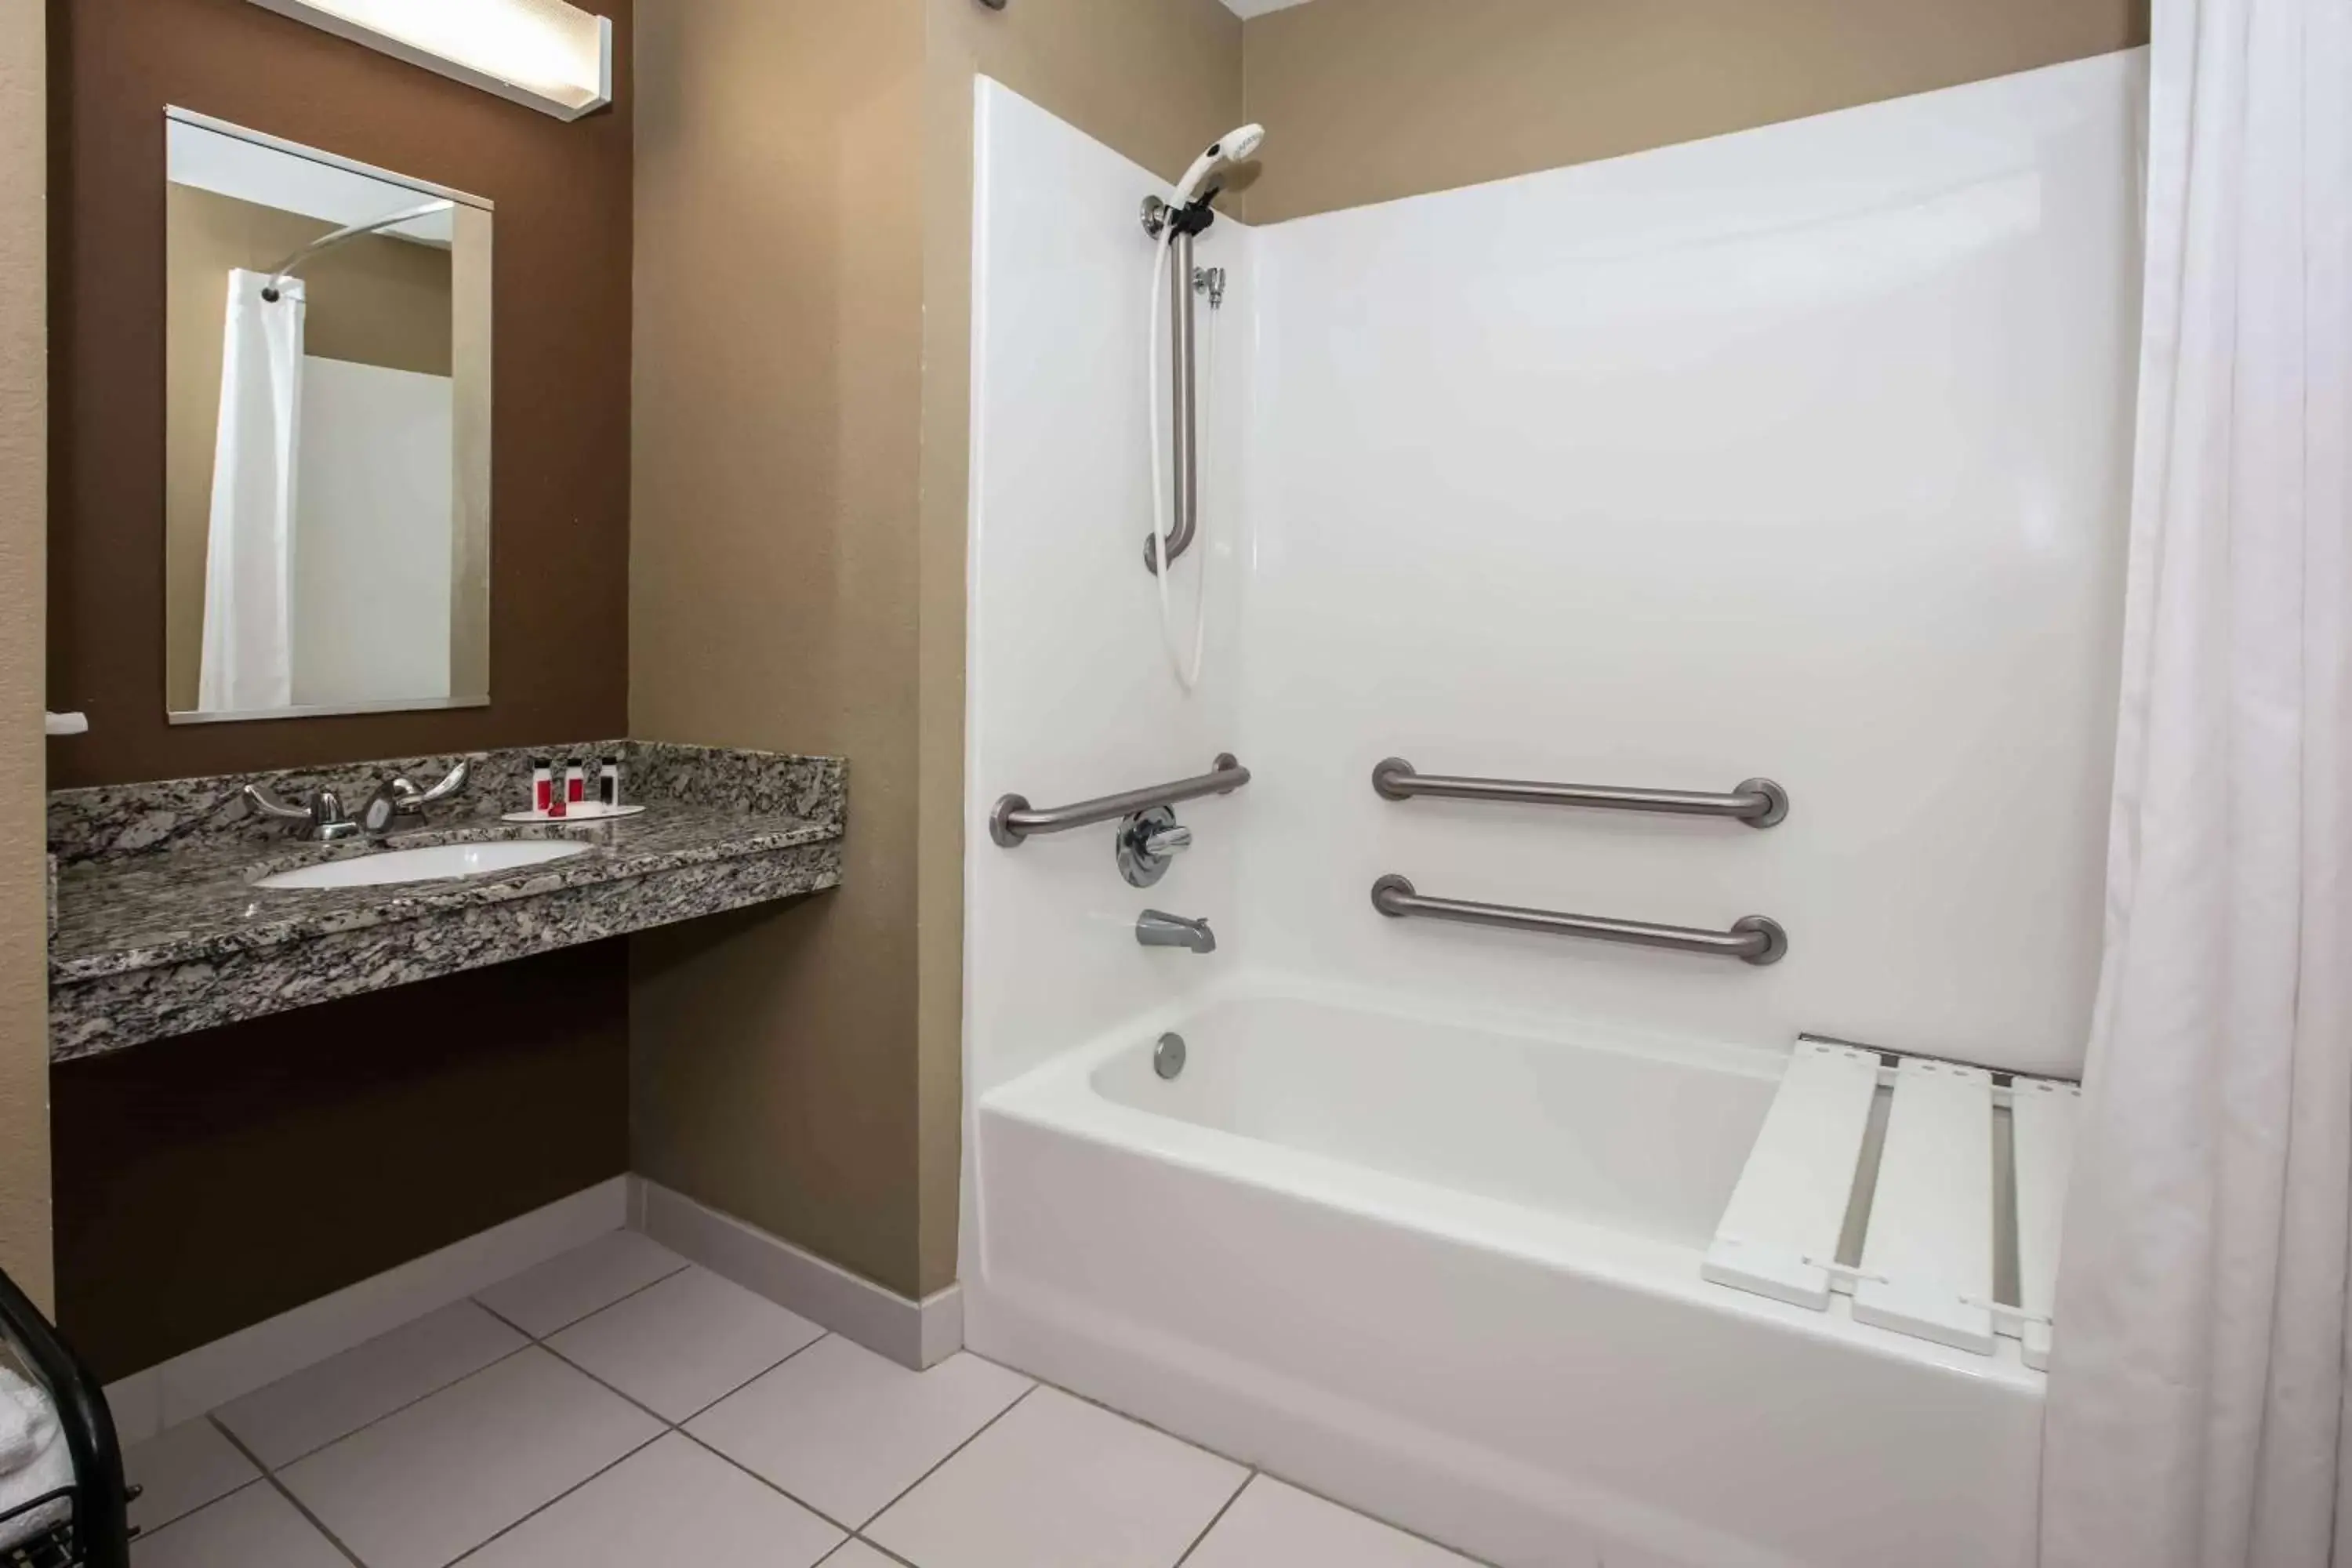 Bathroom in Microtel Inn and Suites Pecos